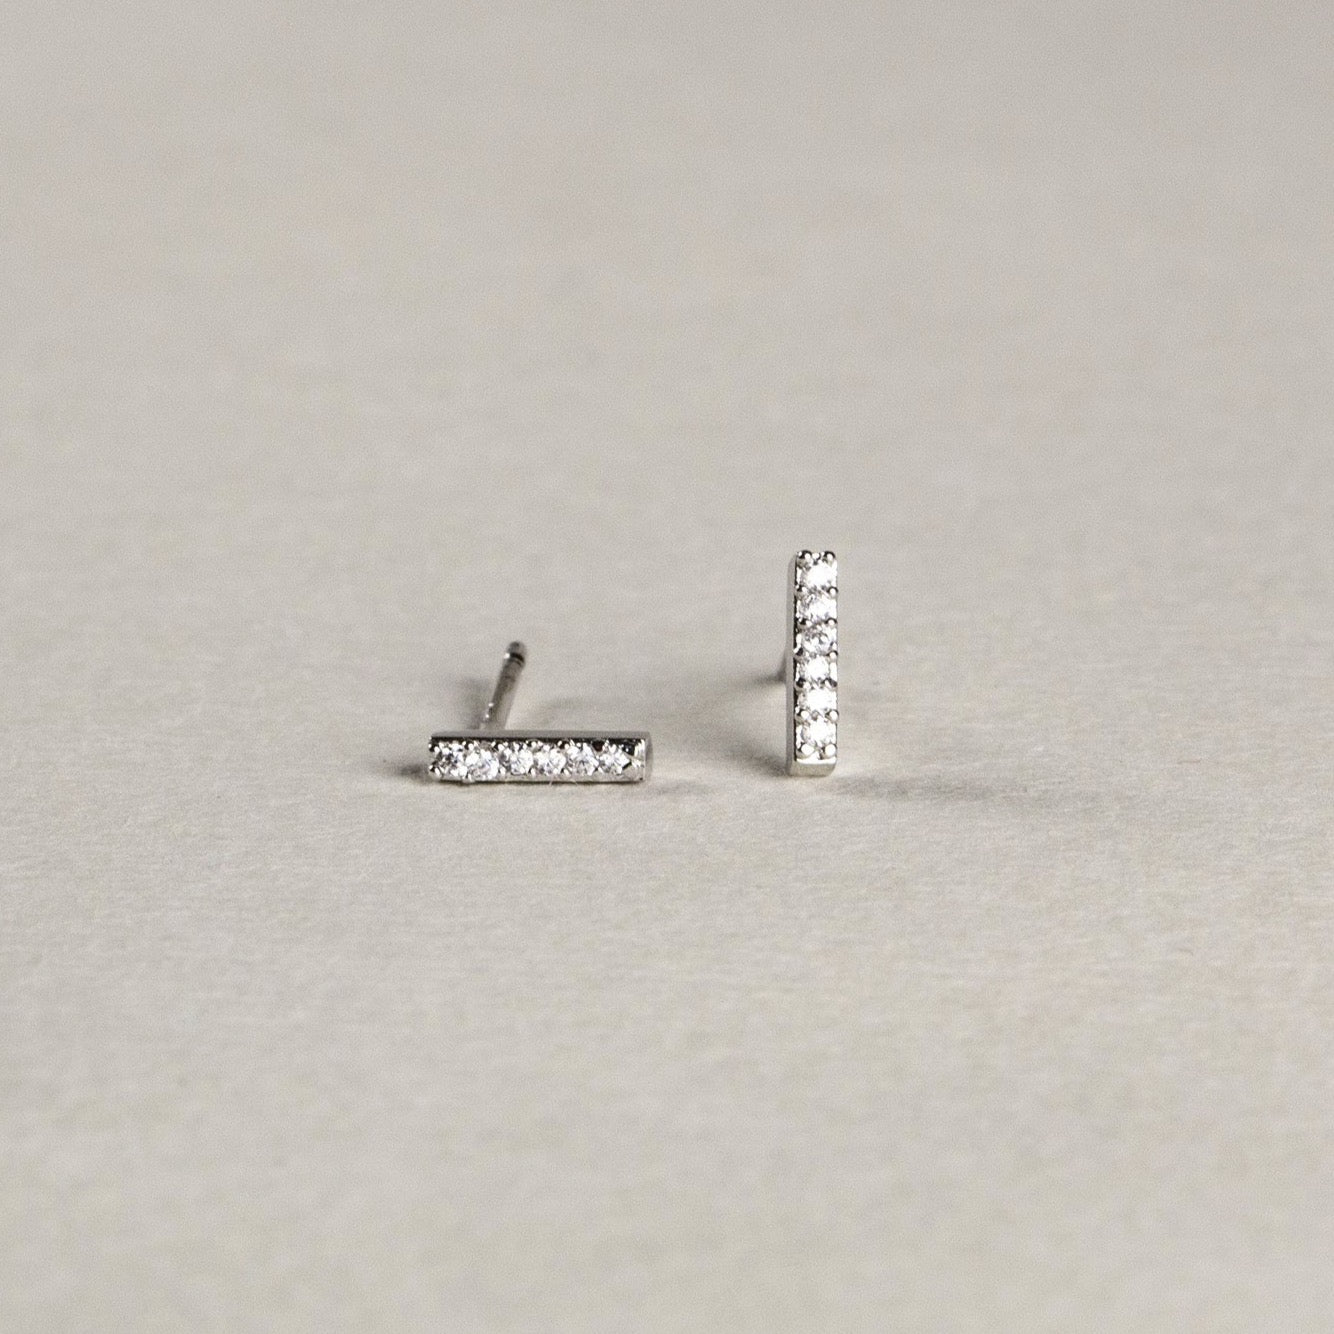 extremly versatile studs that are perfect for any 'ear cocktail'